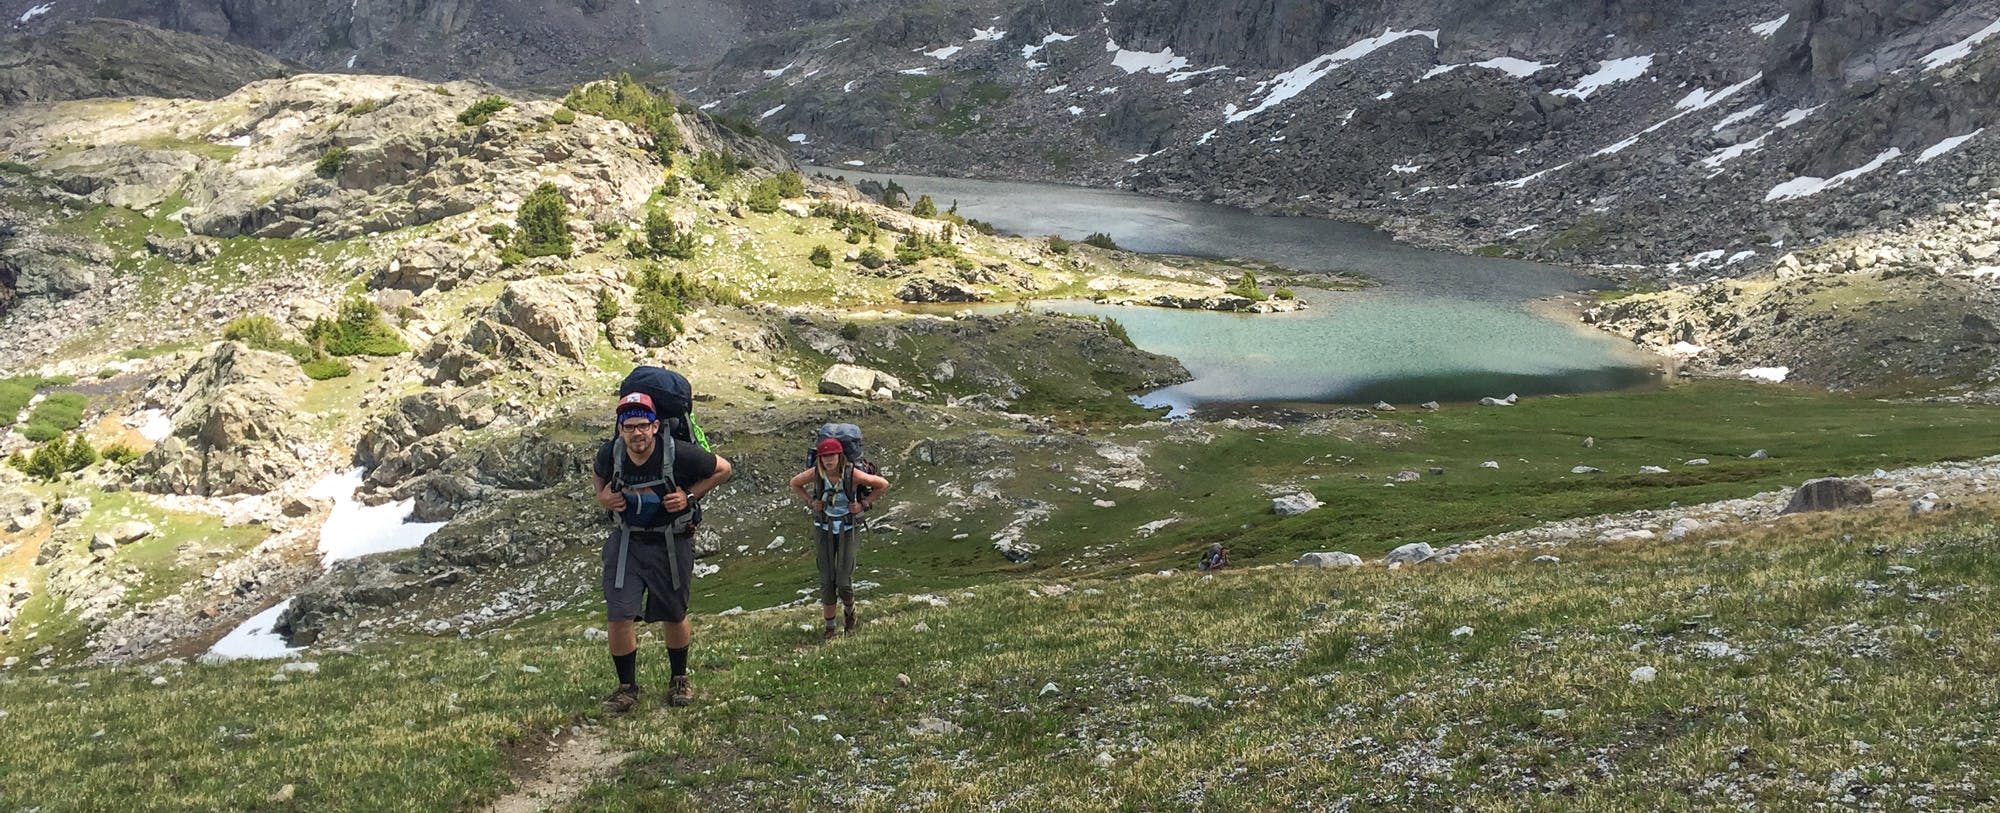 5 Reasons to Backpack the Wind River Range